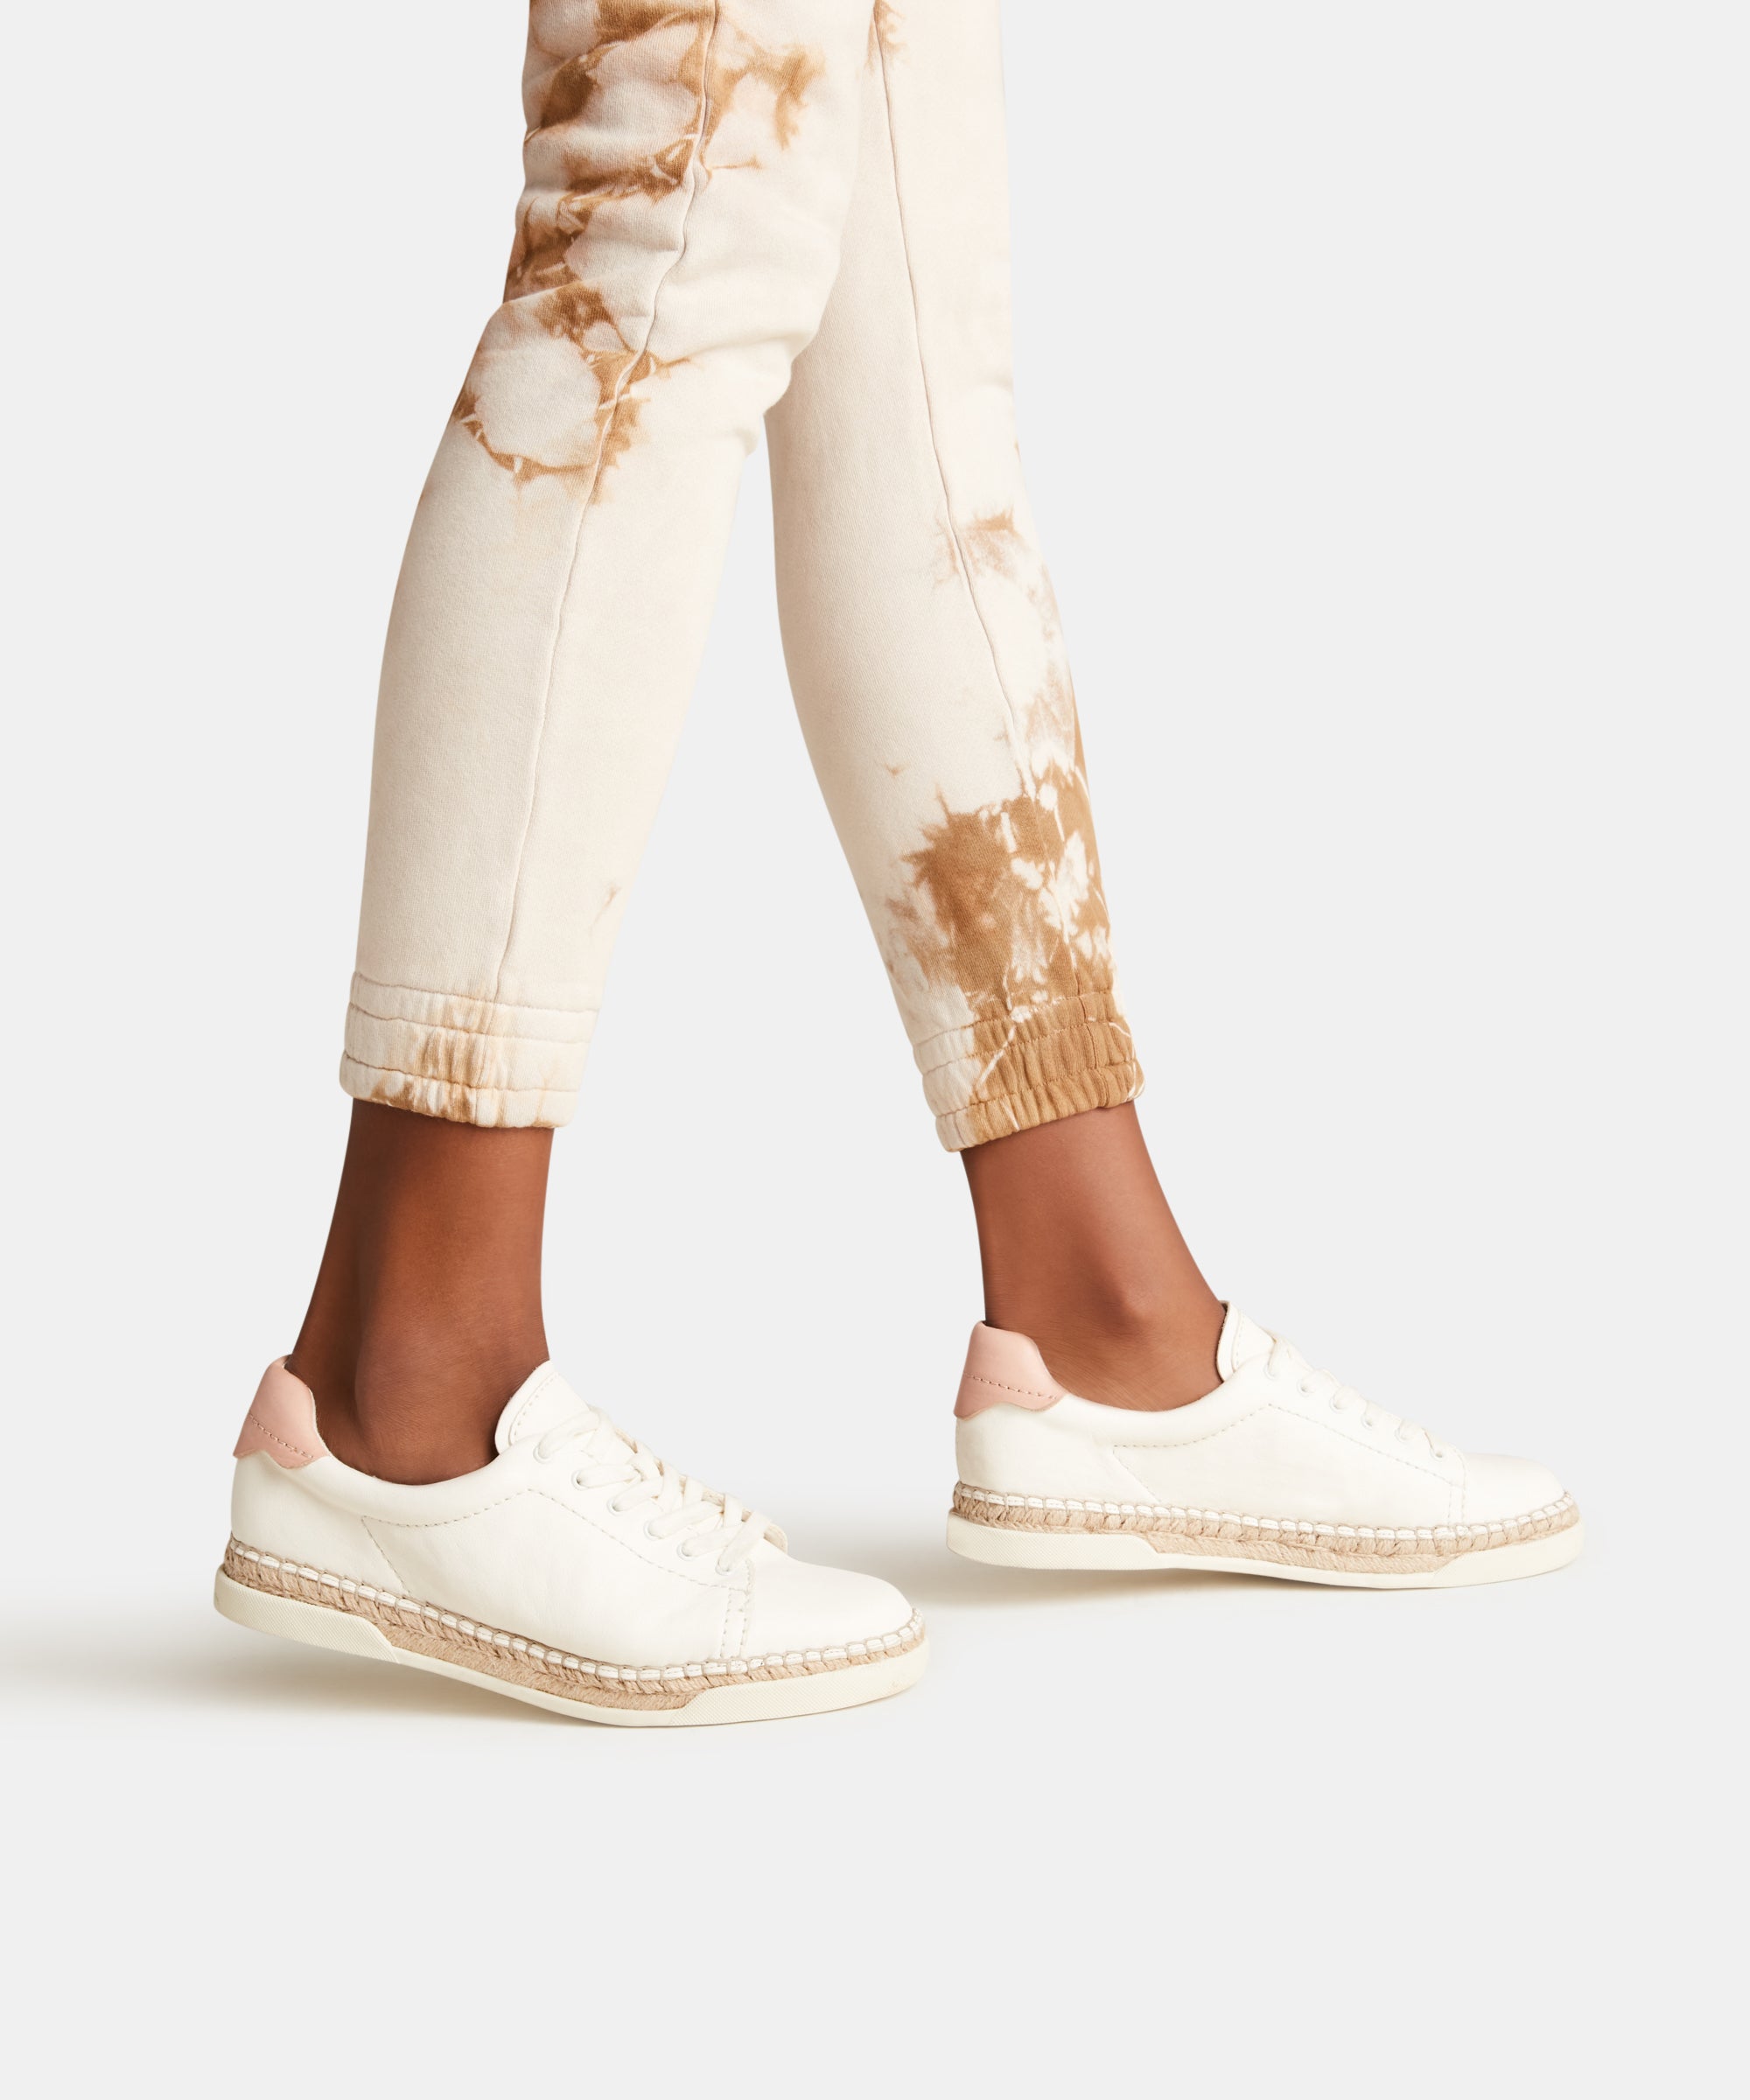 MADOX SNEAKERS IN WHITE – Dolce Vita